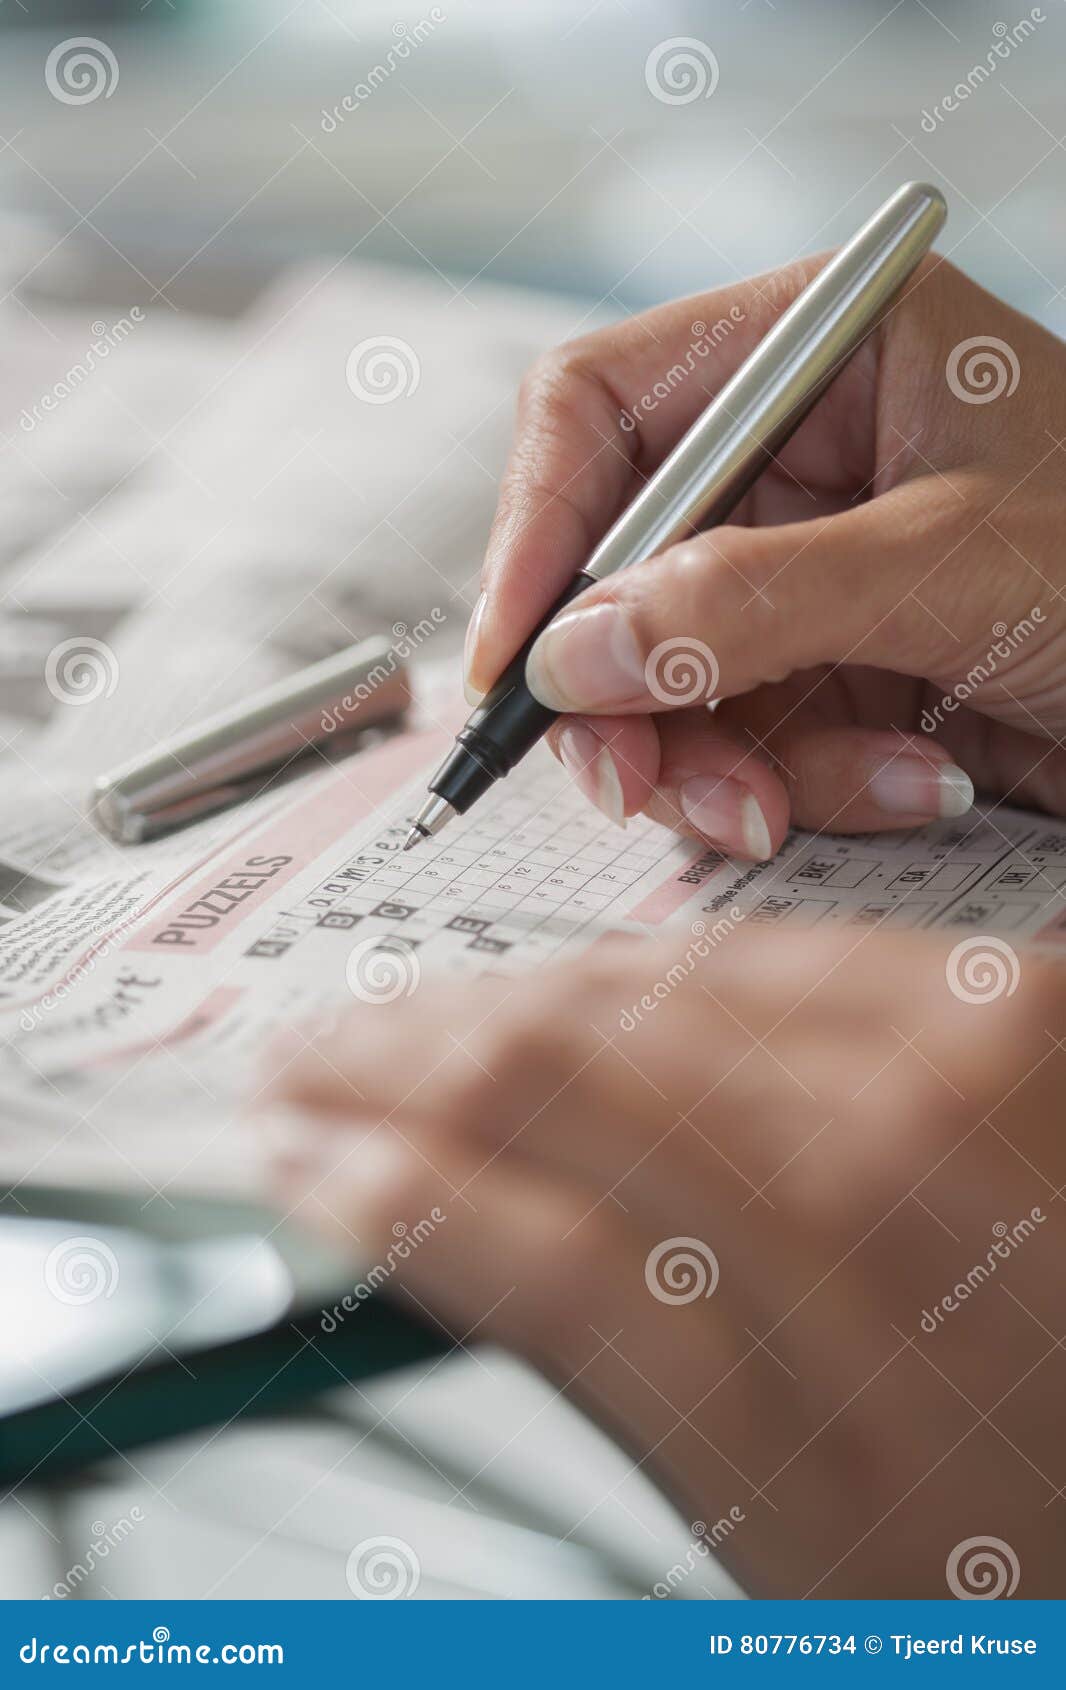 Solving a Crossword Puzzle Close up Stock Photo Image of exercise